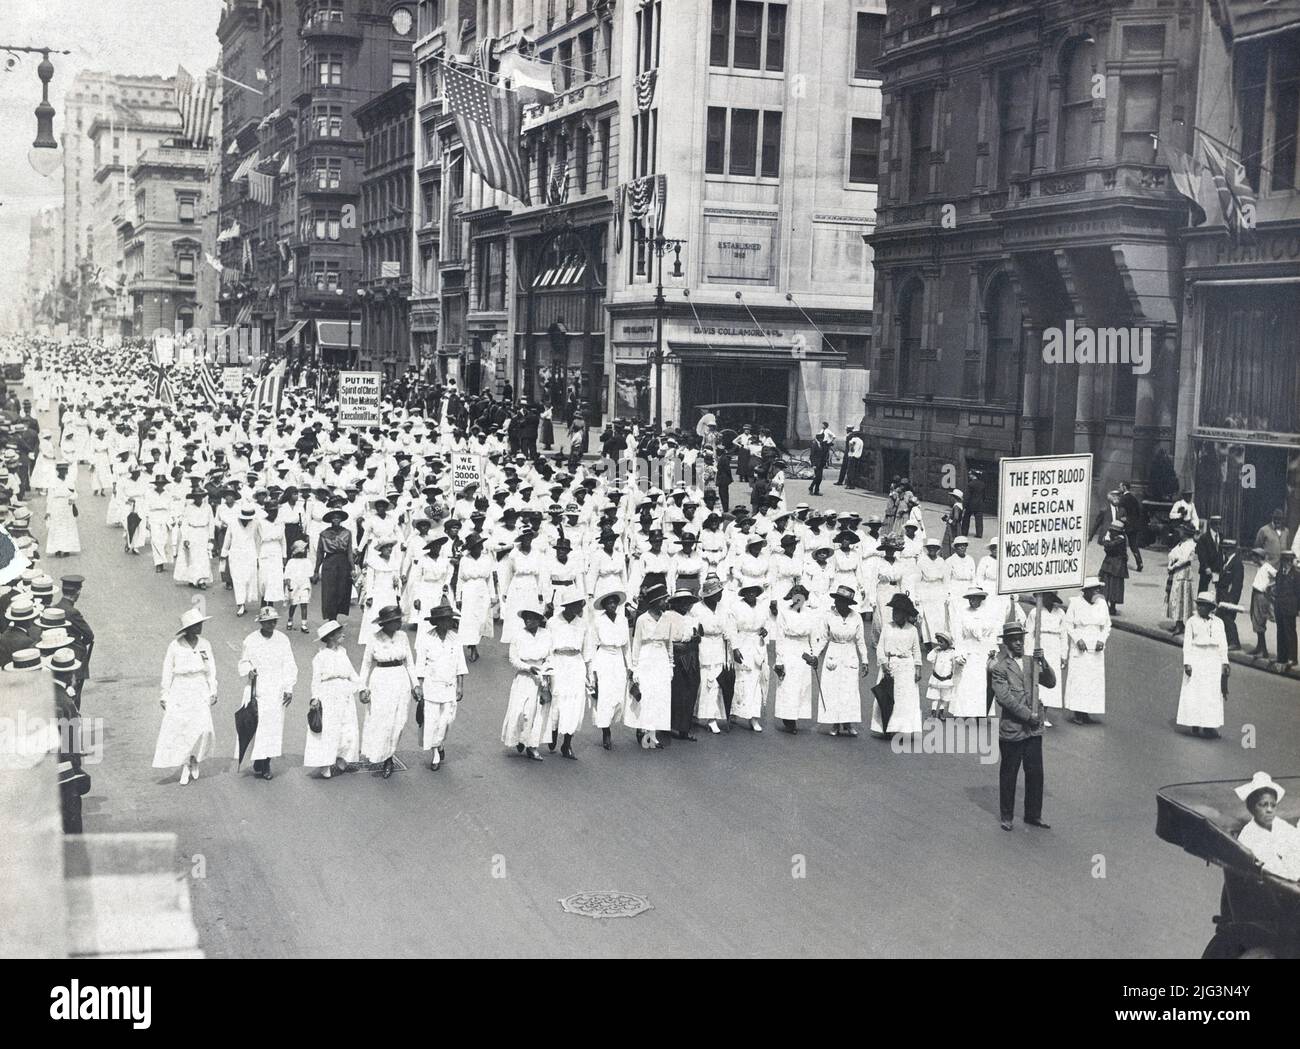 Silent Parade Protest against East St. Louis Riots, New York City, New York, USA, Underwood & Underwood, July 28, 1917 Stock Photo